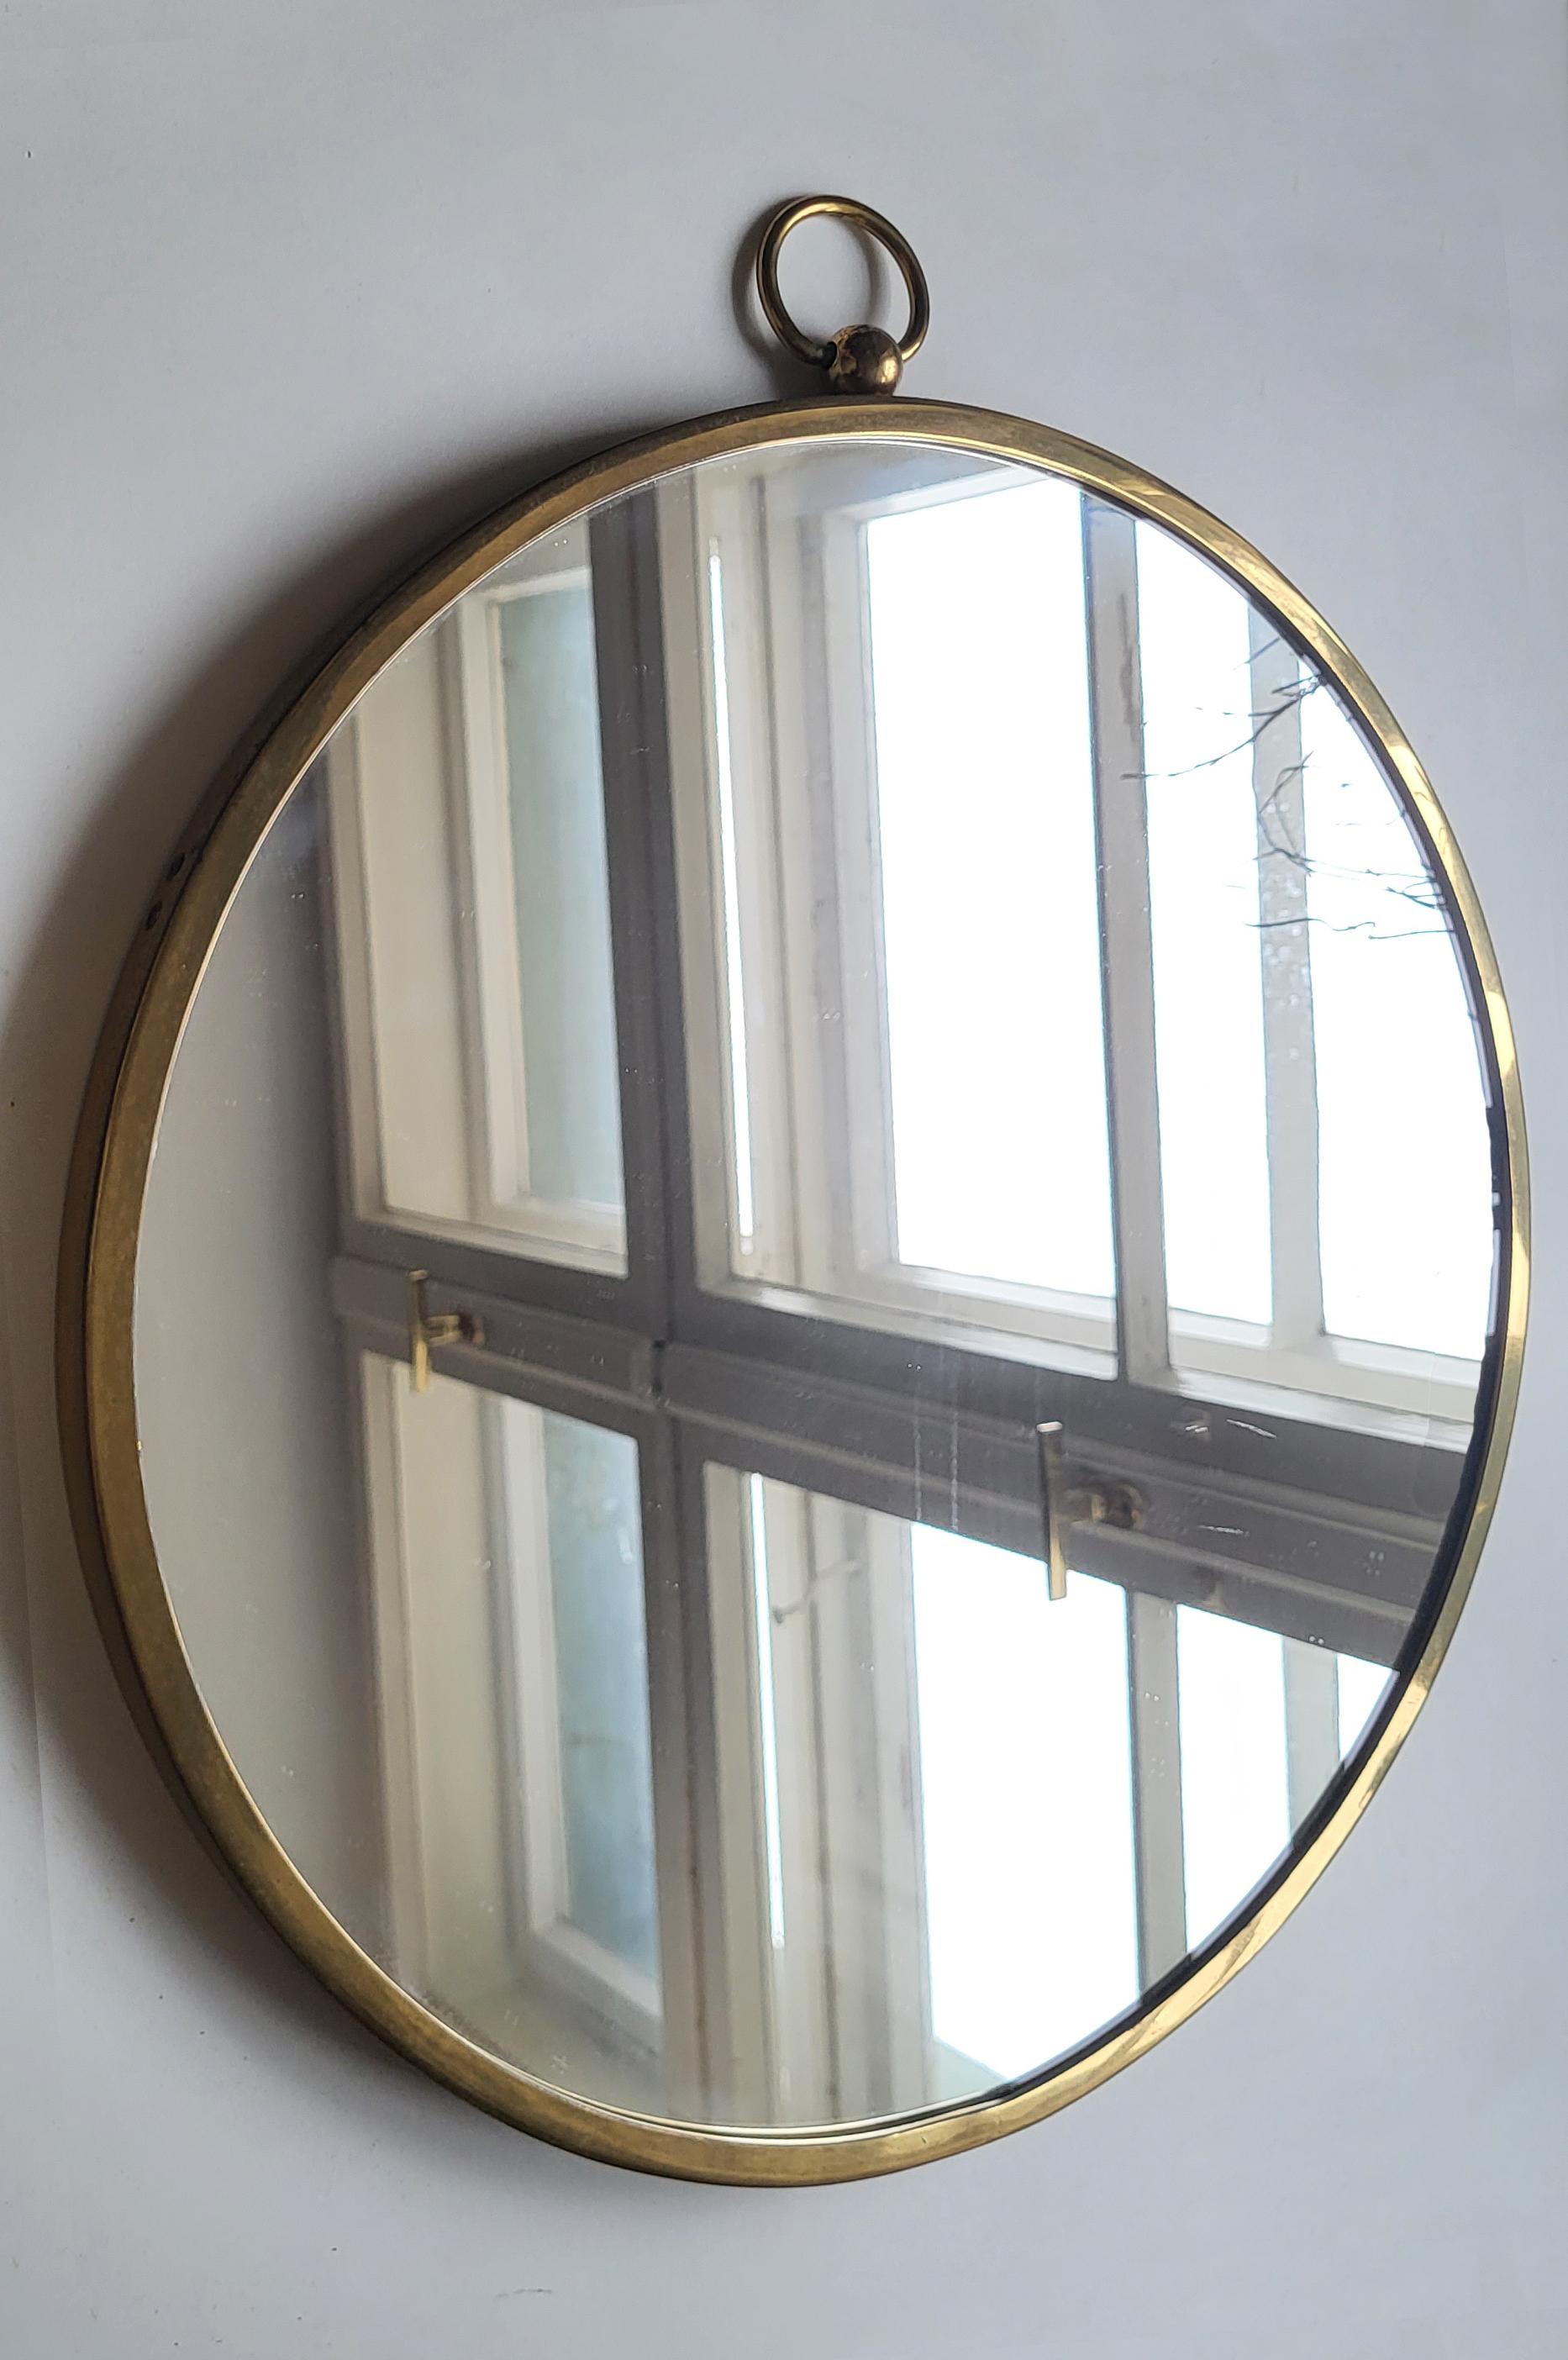 Wonderful mirror with brass frame and a decorative brass ring. 
Austria, 1950s.